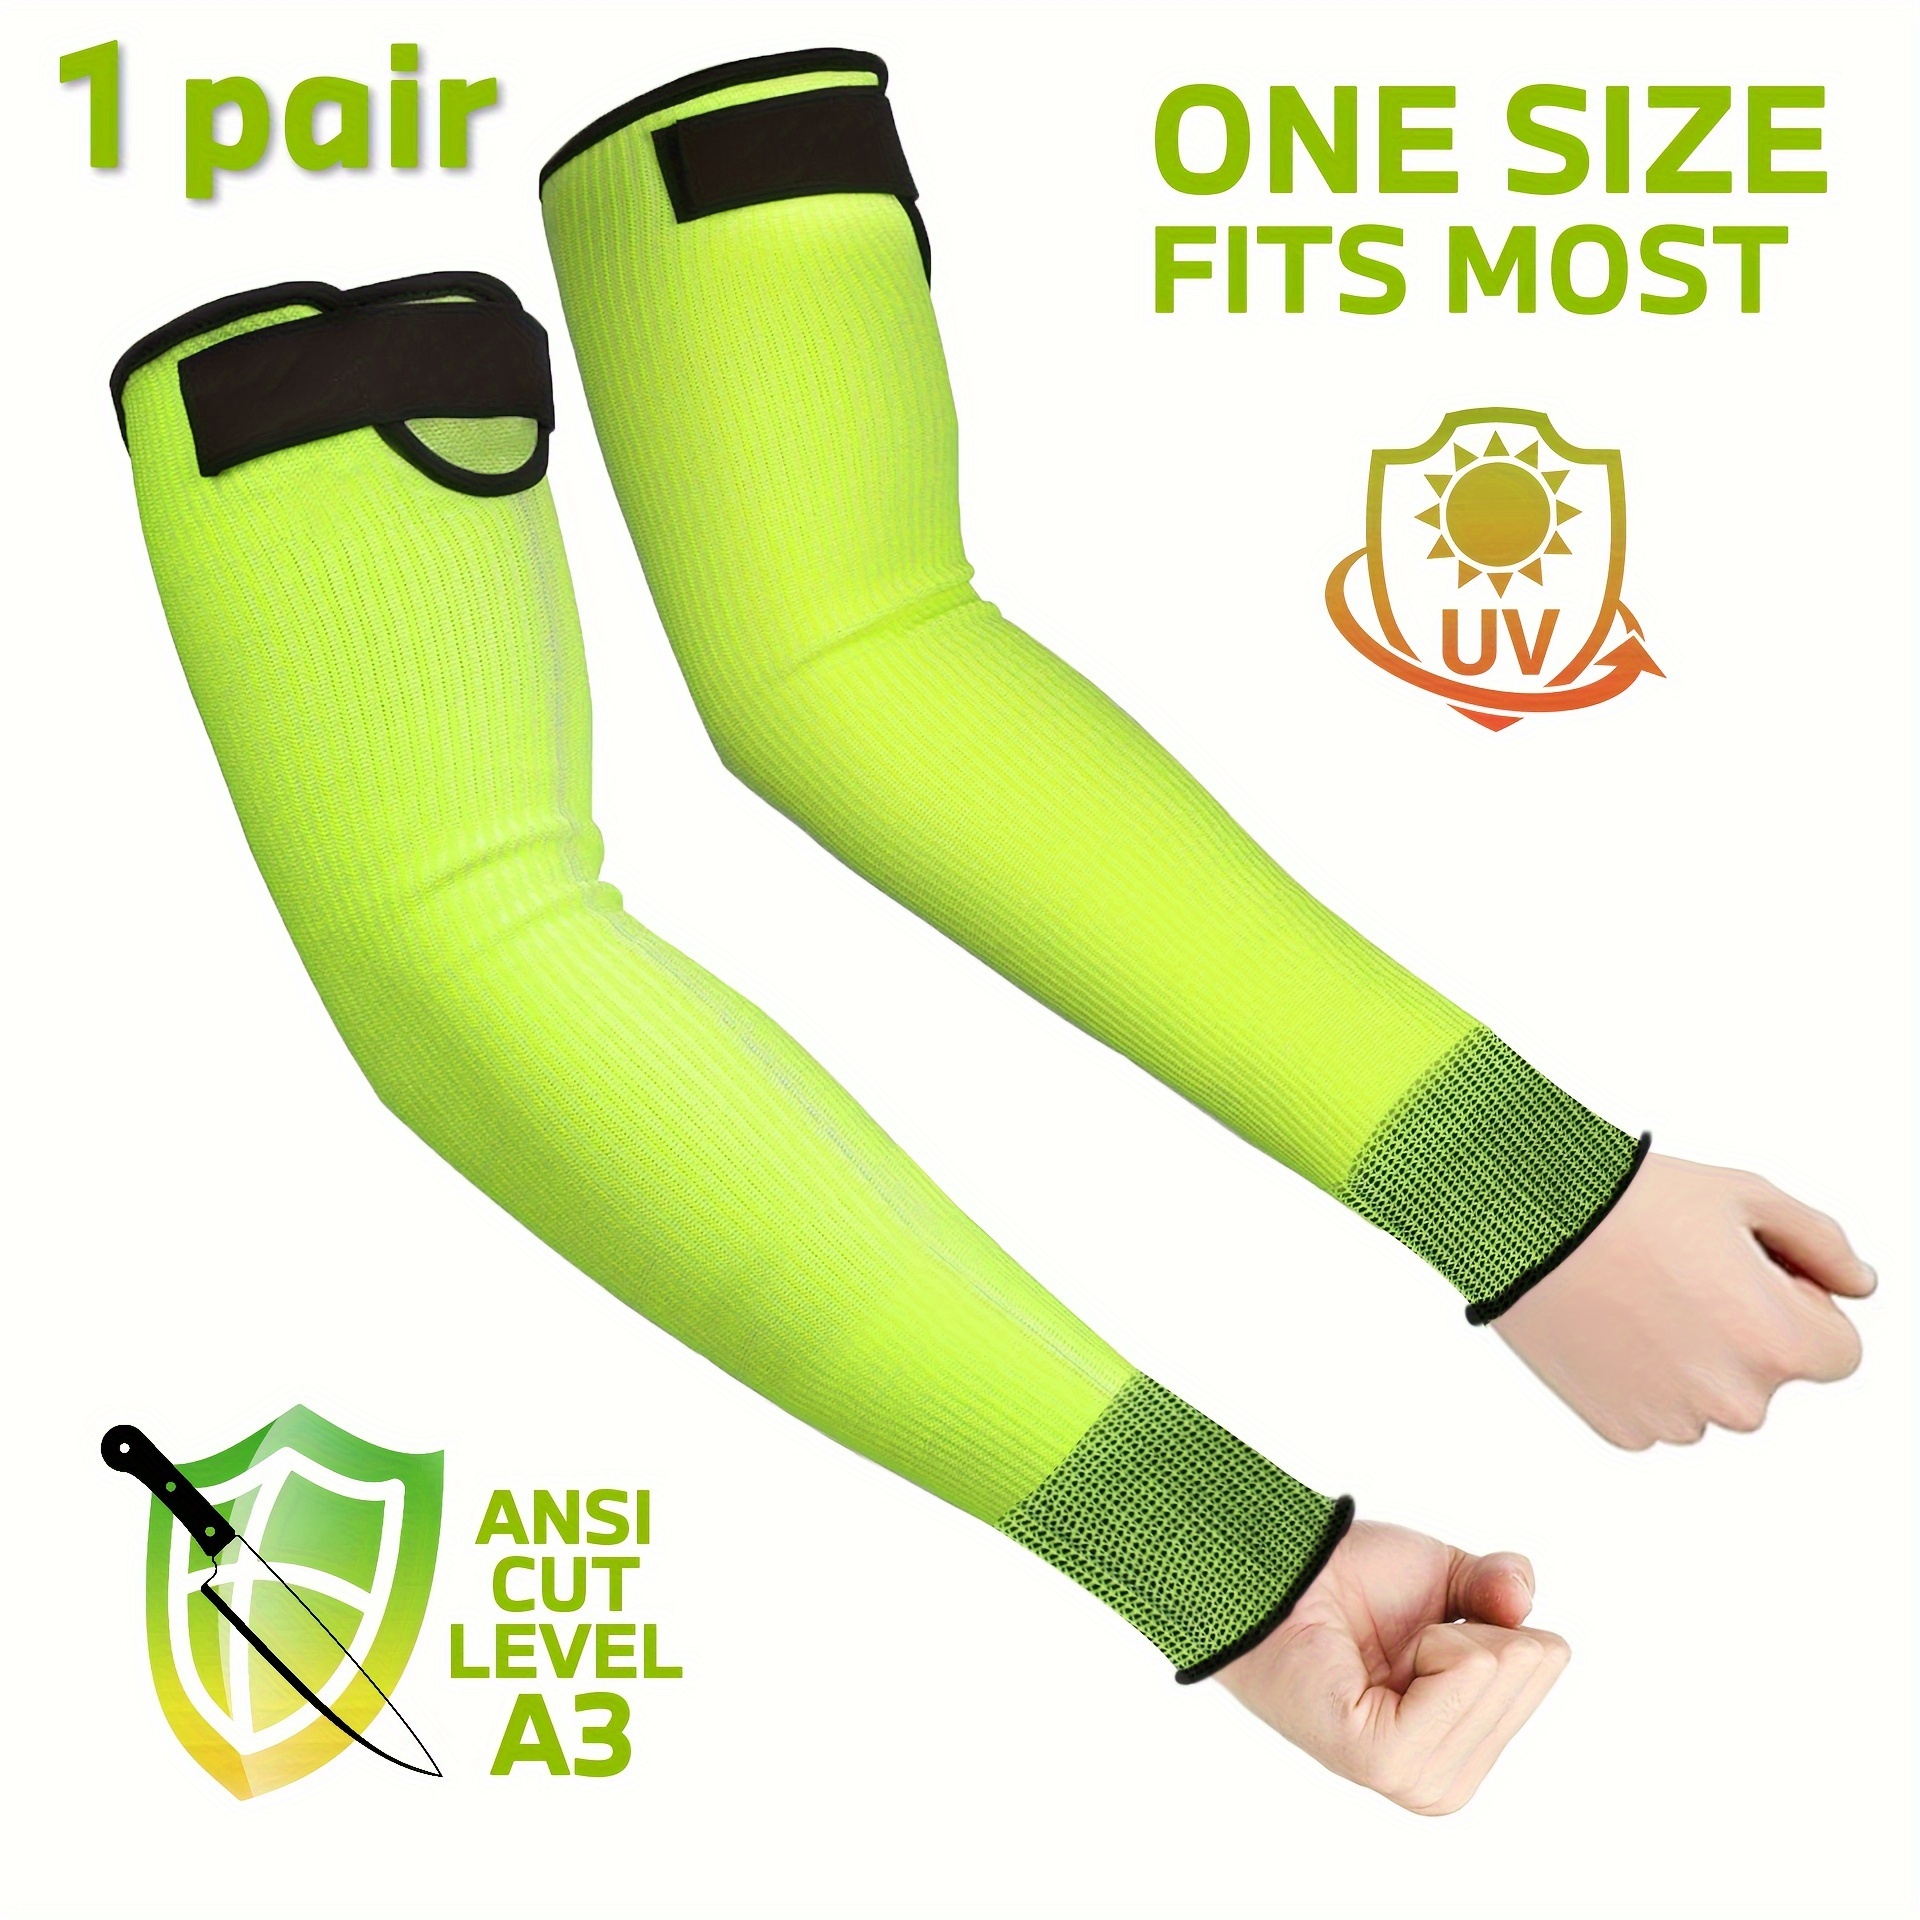 

1 Pair, Cut Resistant Sleeves With Adjustable Hook And Loop, Protective Arm Sleeves For Yard Work, Kitchen, Arm Guards For Biting, Pet Grooming, Gardening Gifts For Women, Green